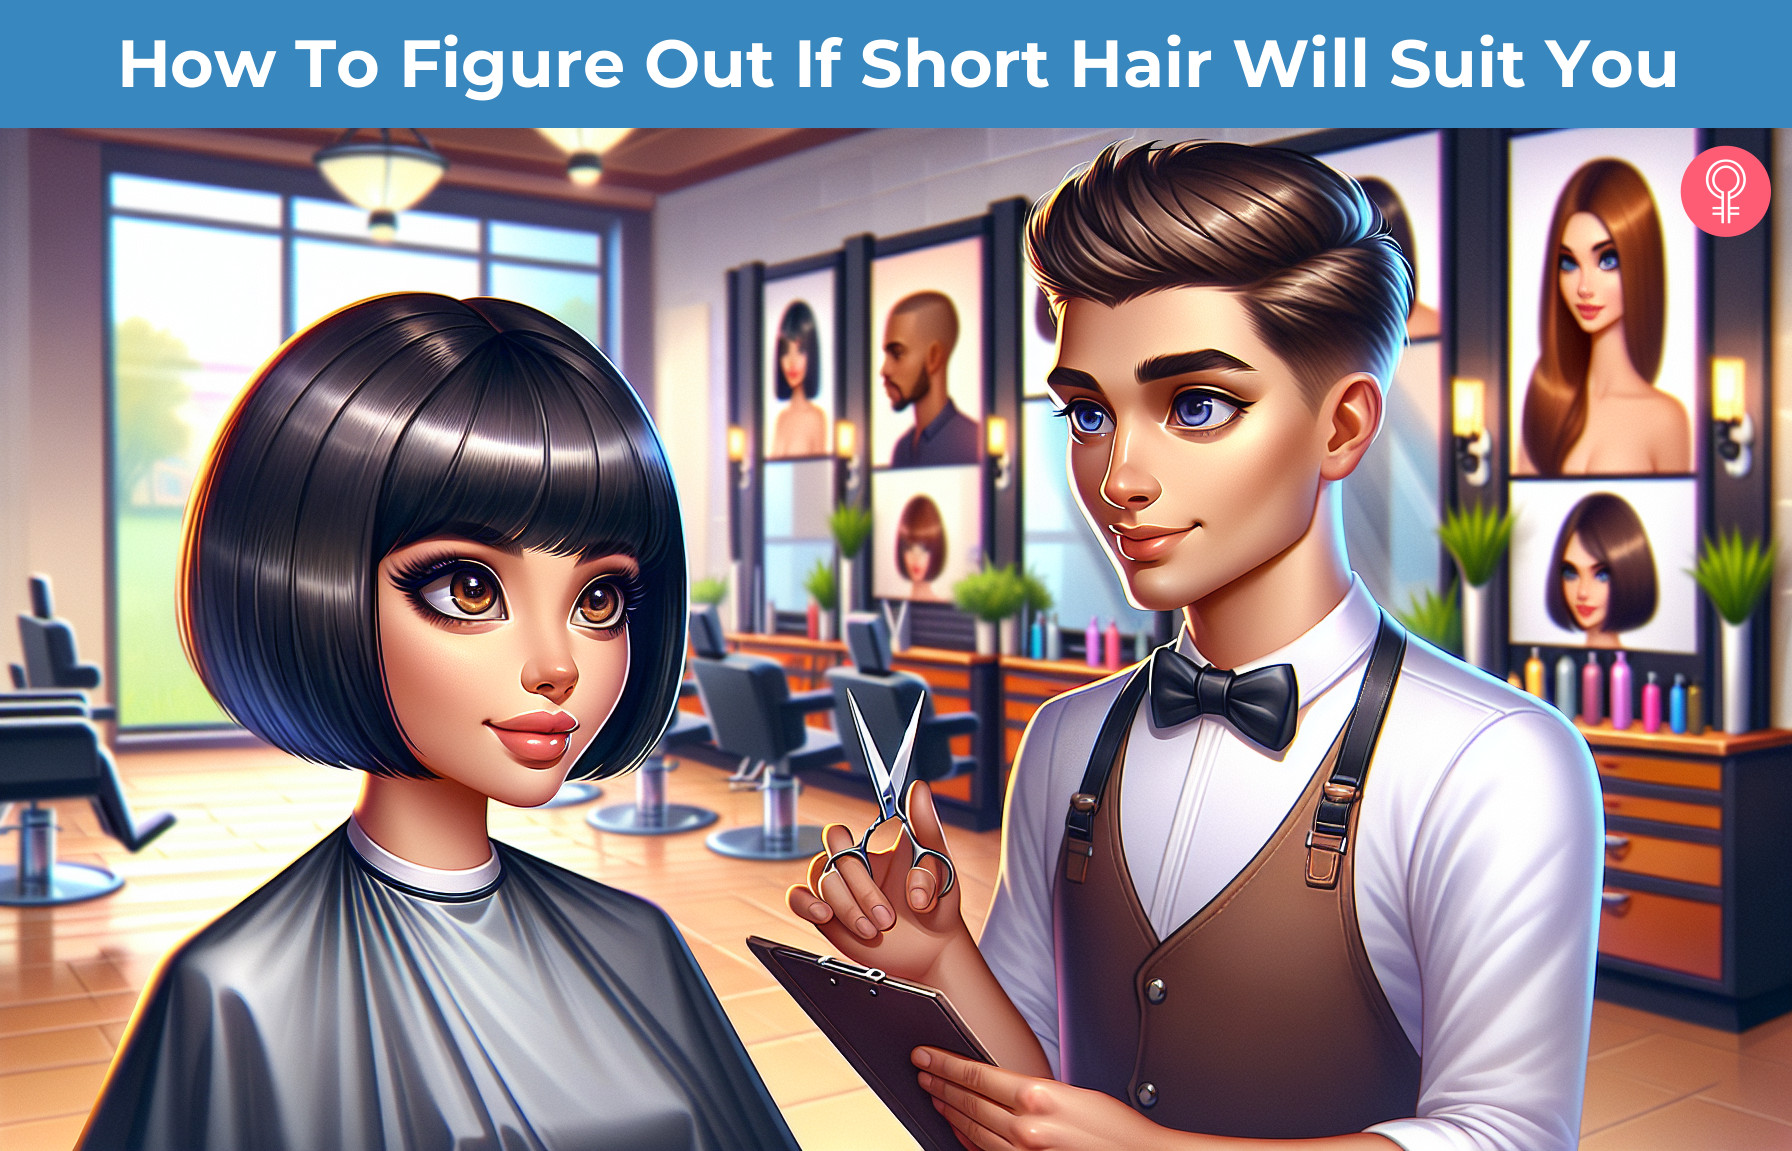 What Hairstyle Suits You: The Best Hairdo for the Round, Oval, or Square  Face Shape - HubPages